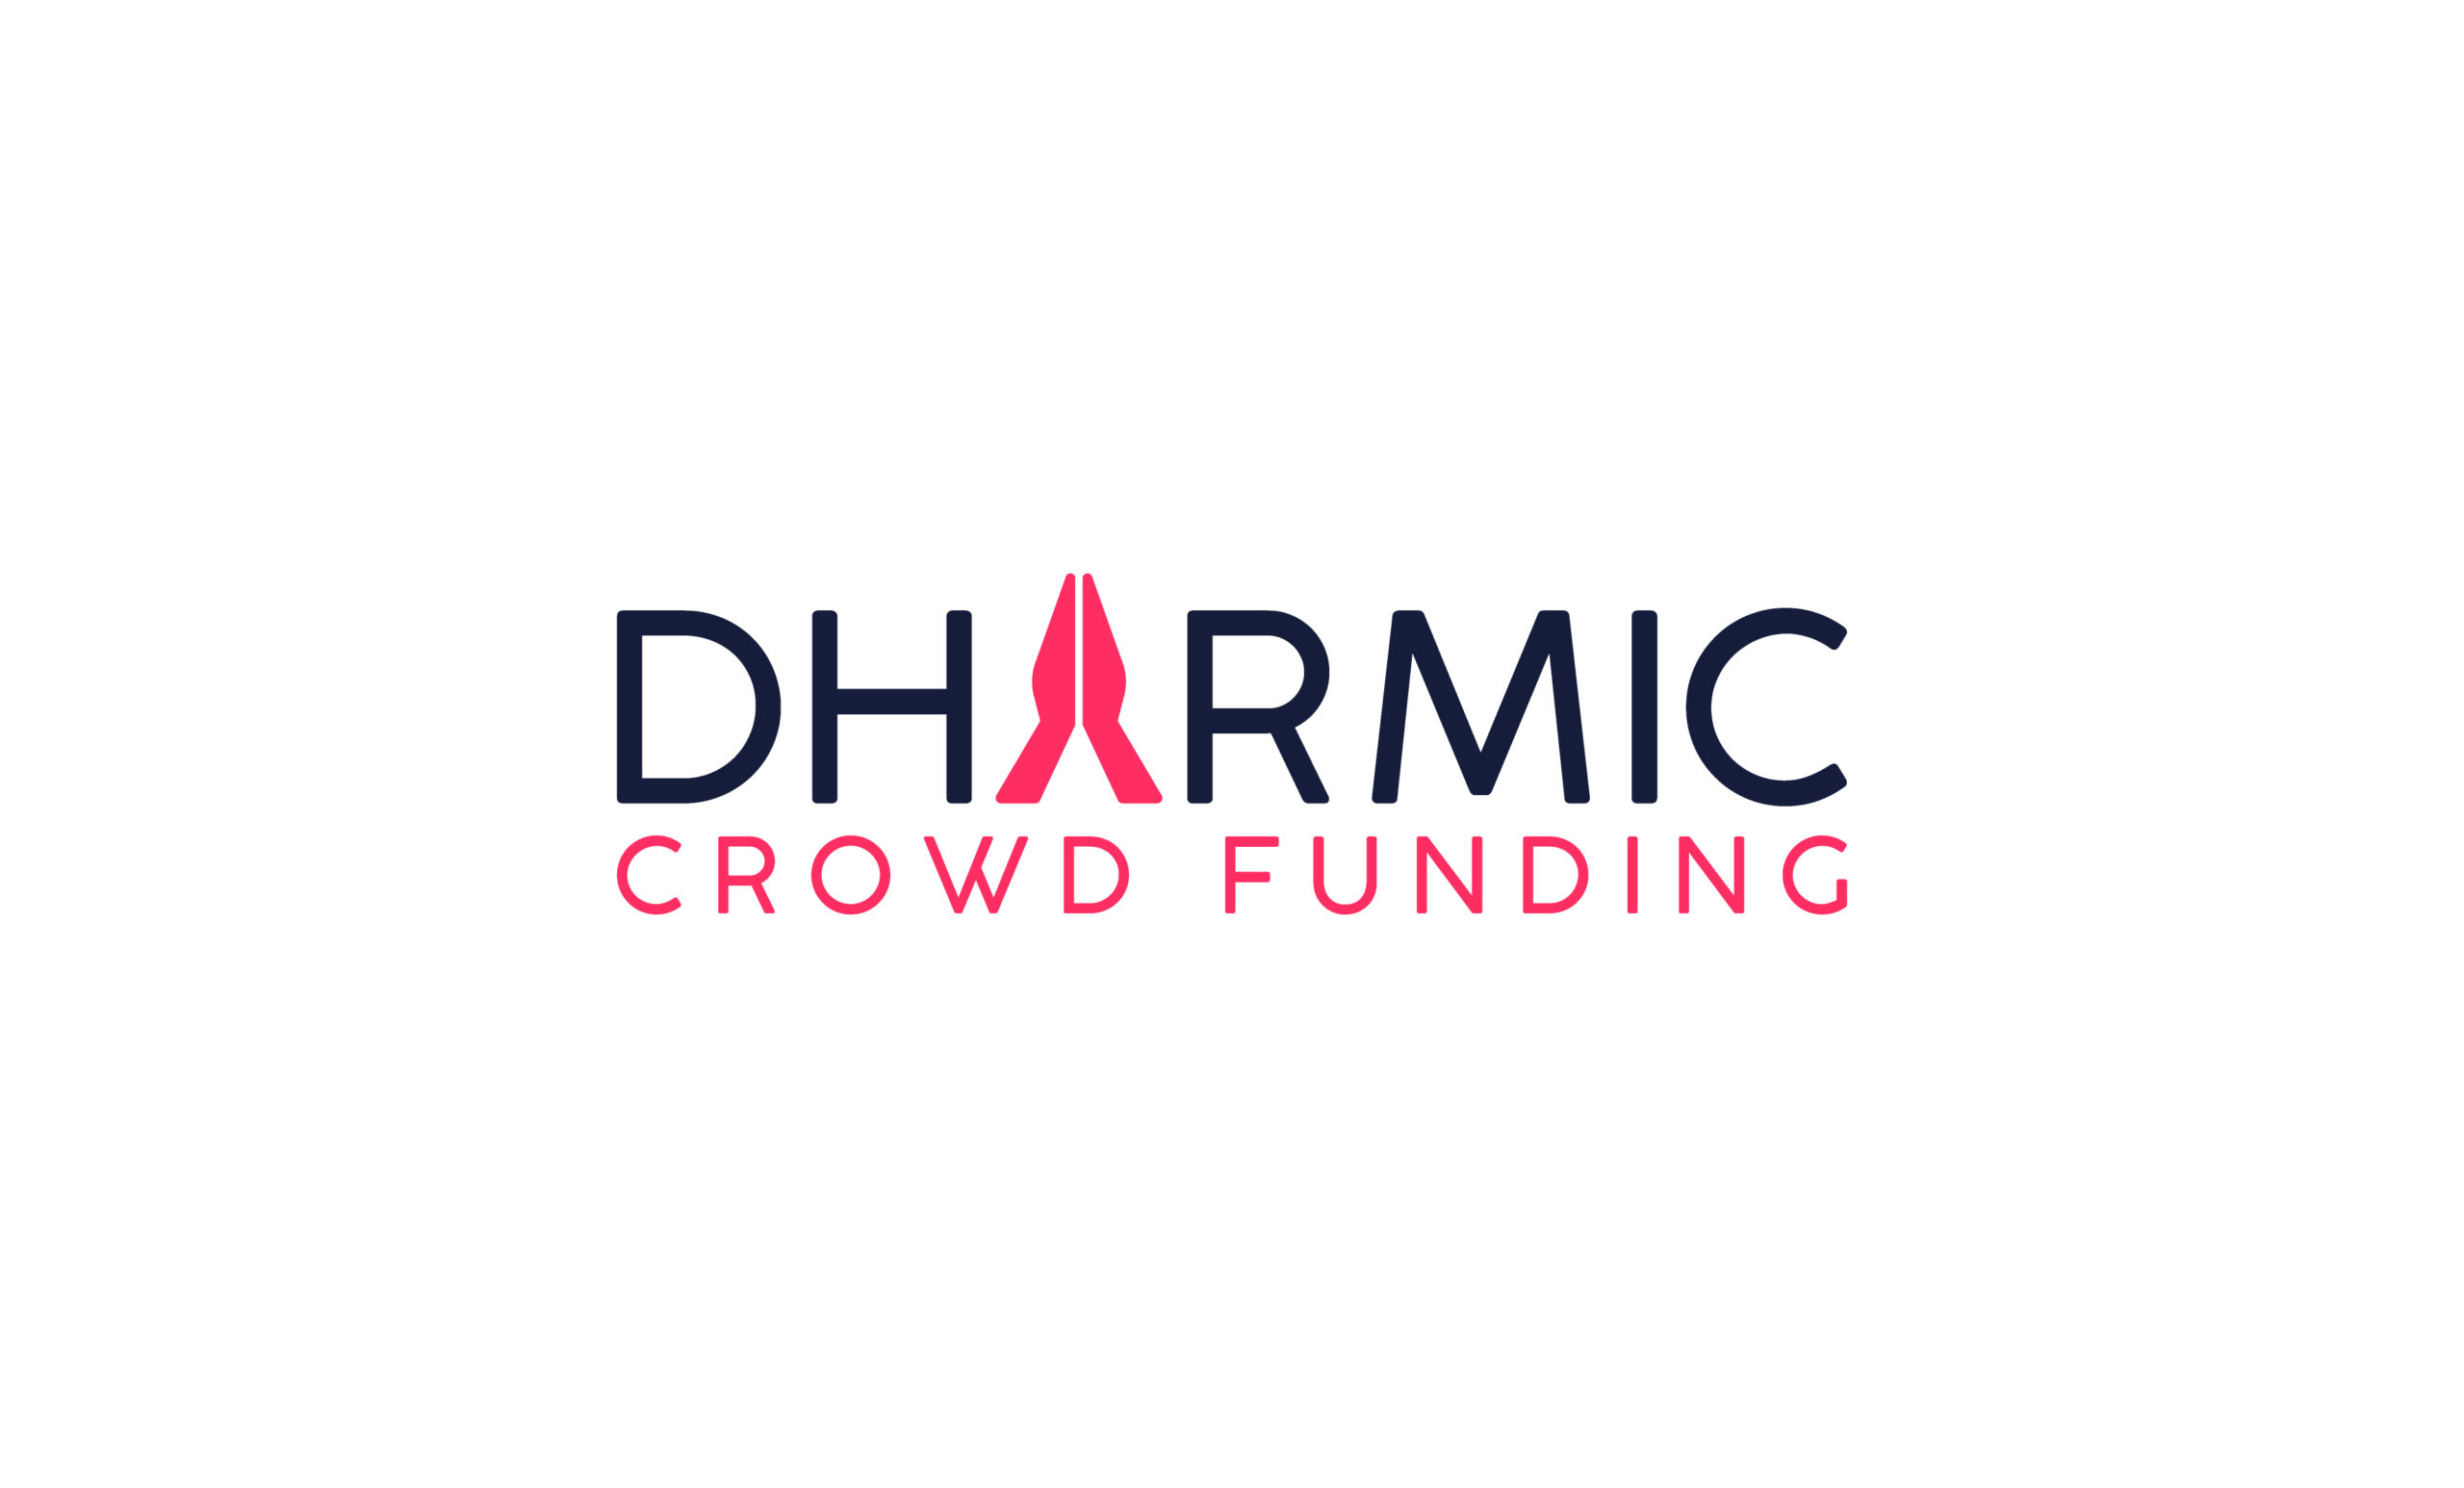 Ready go to ... https://dharmiccrowdfunding.com [ Support Pioneering Dharmic Causes]